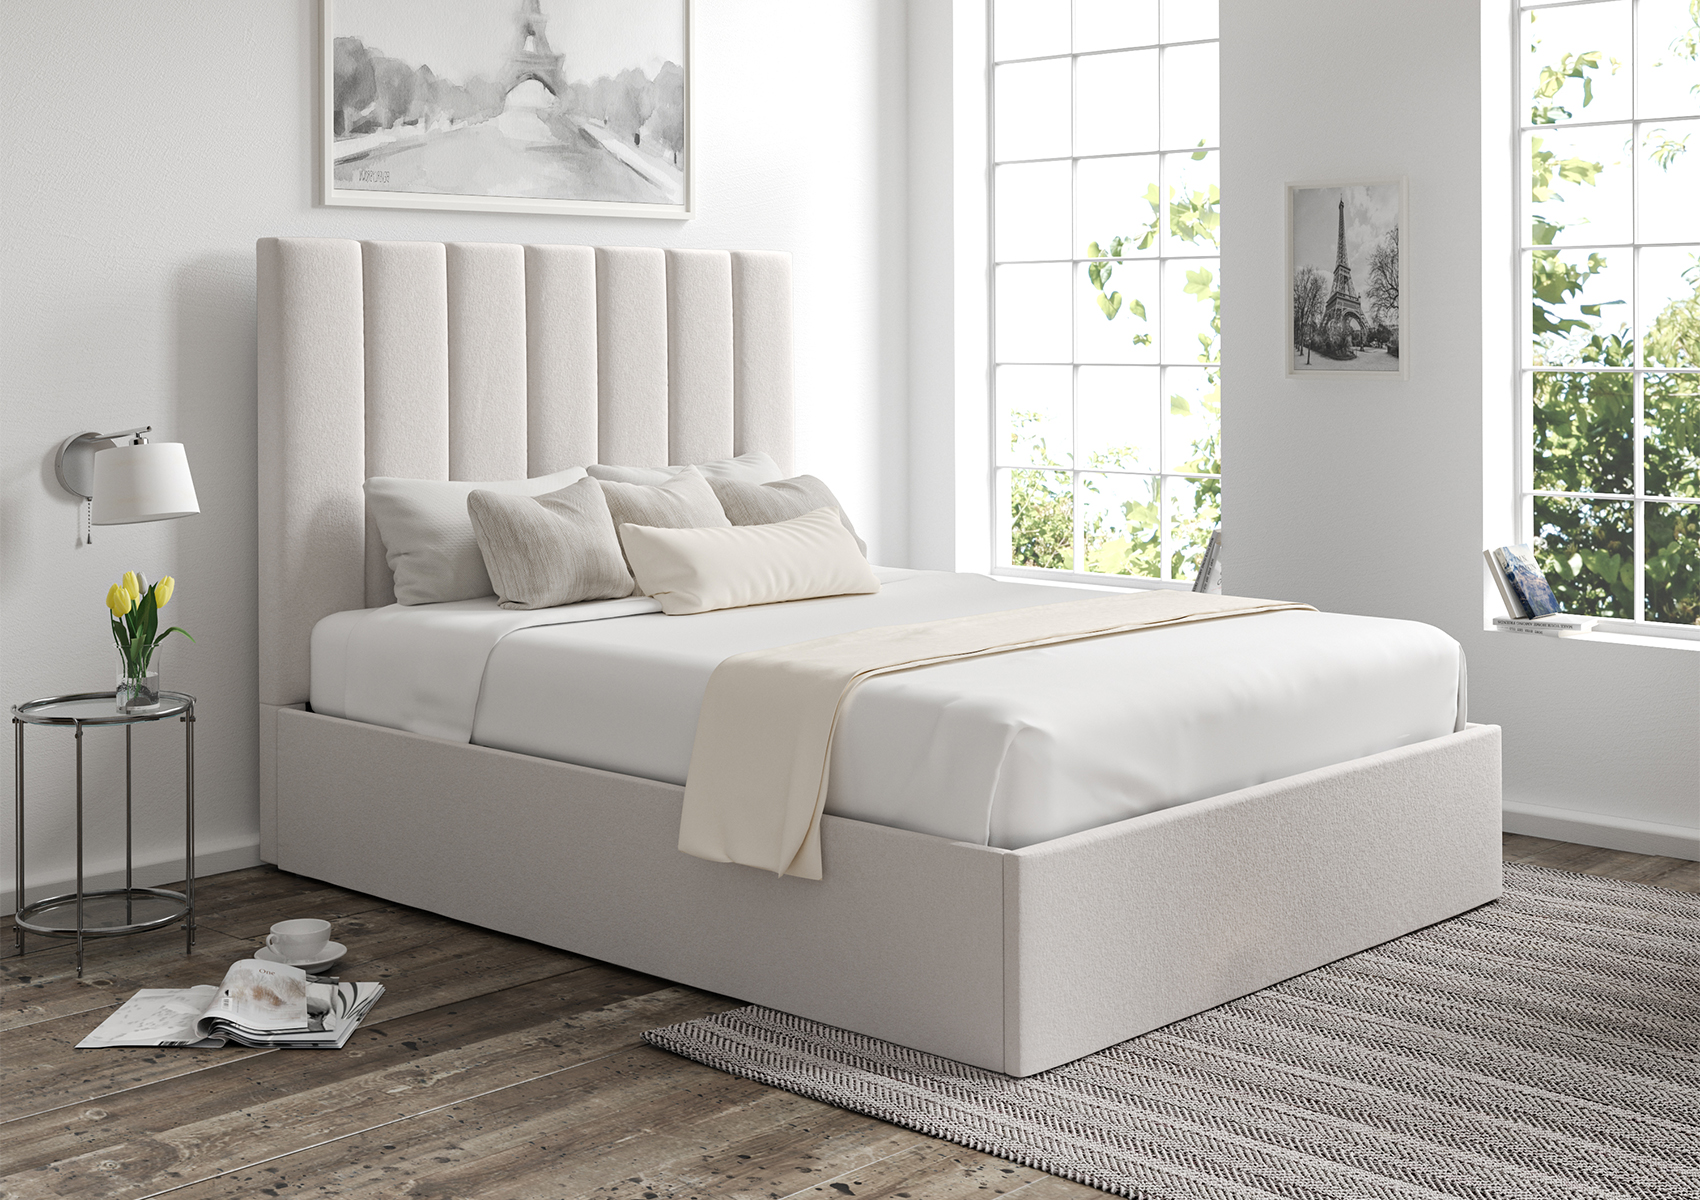 View Amalfi Upholstered Ottoman Bed Frame Only Time4Sleep information